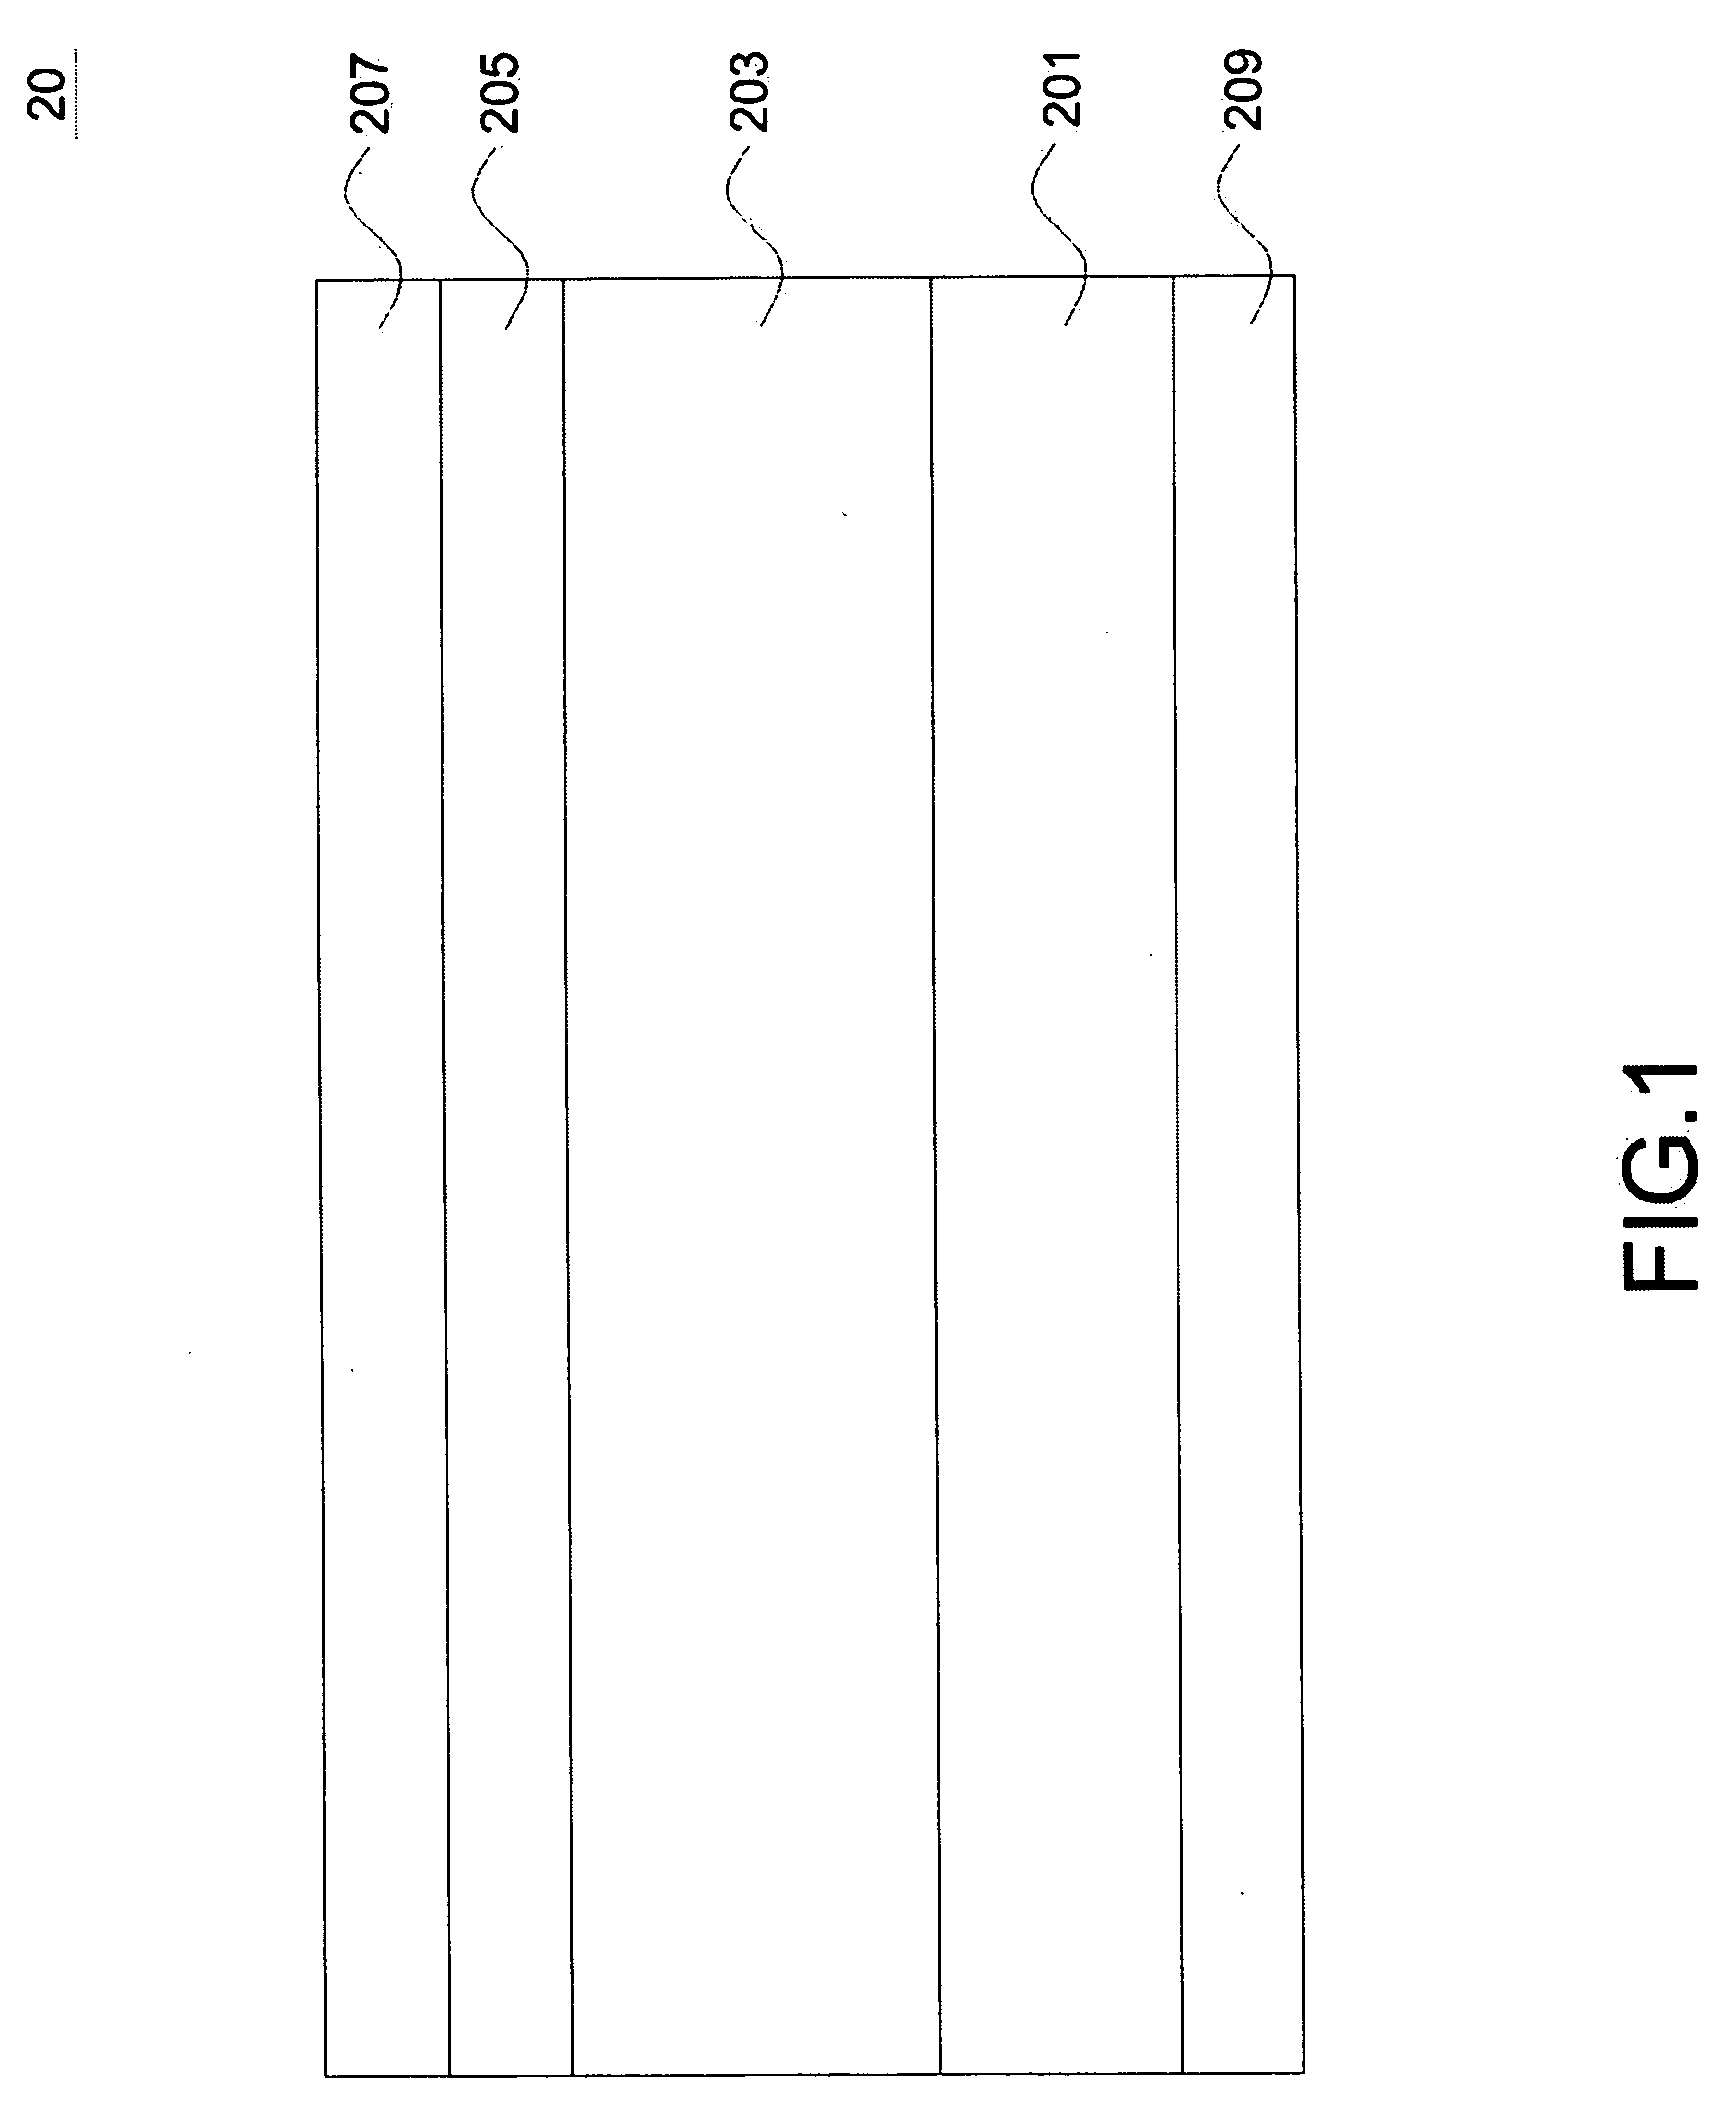 Light emitting diode (LED) with longitudinal package structure